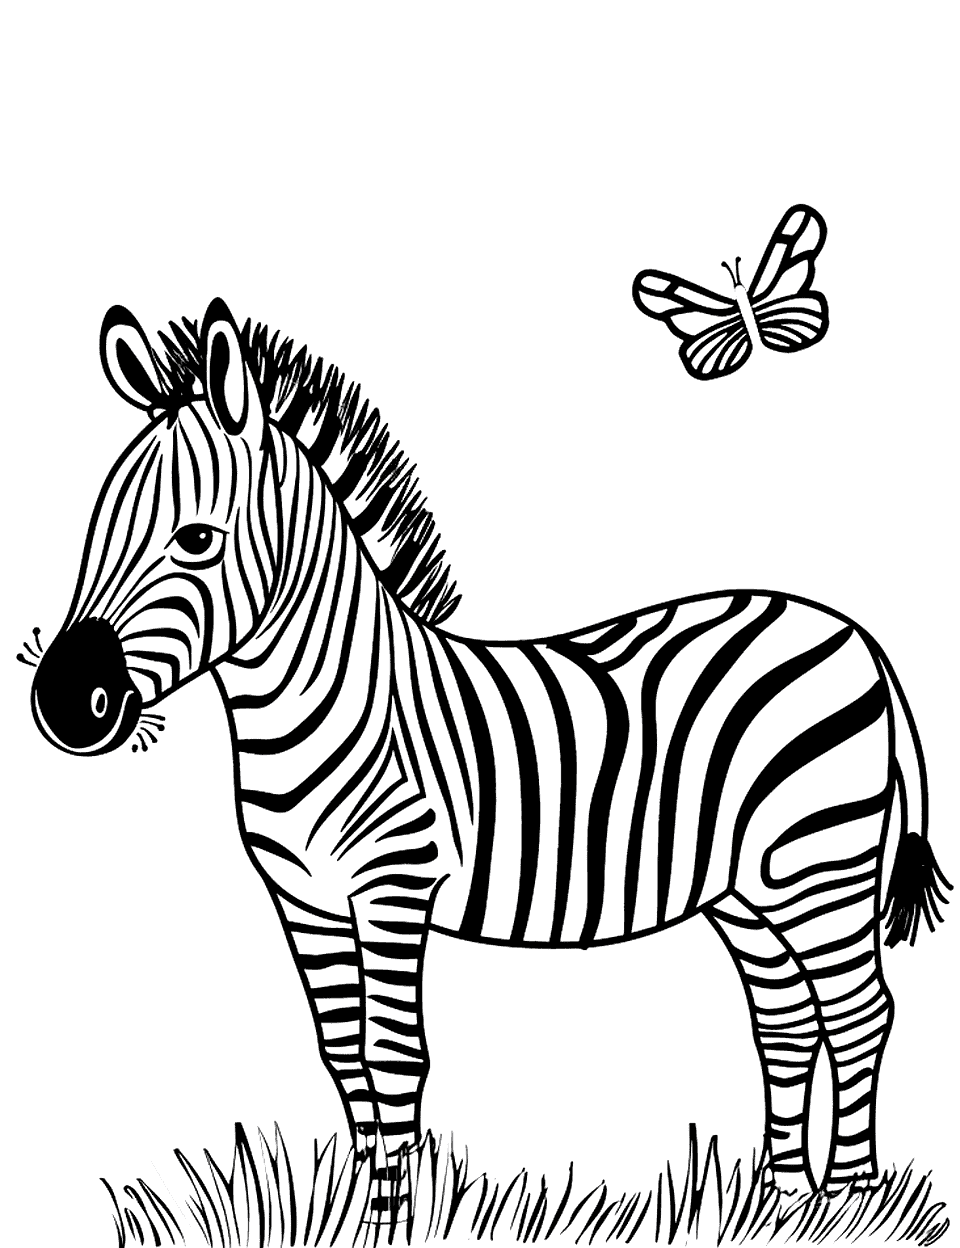 Zebra and Butterfly Coloring Page - A zebra watching a butterfly flying gently around it.